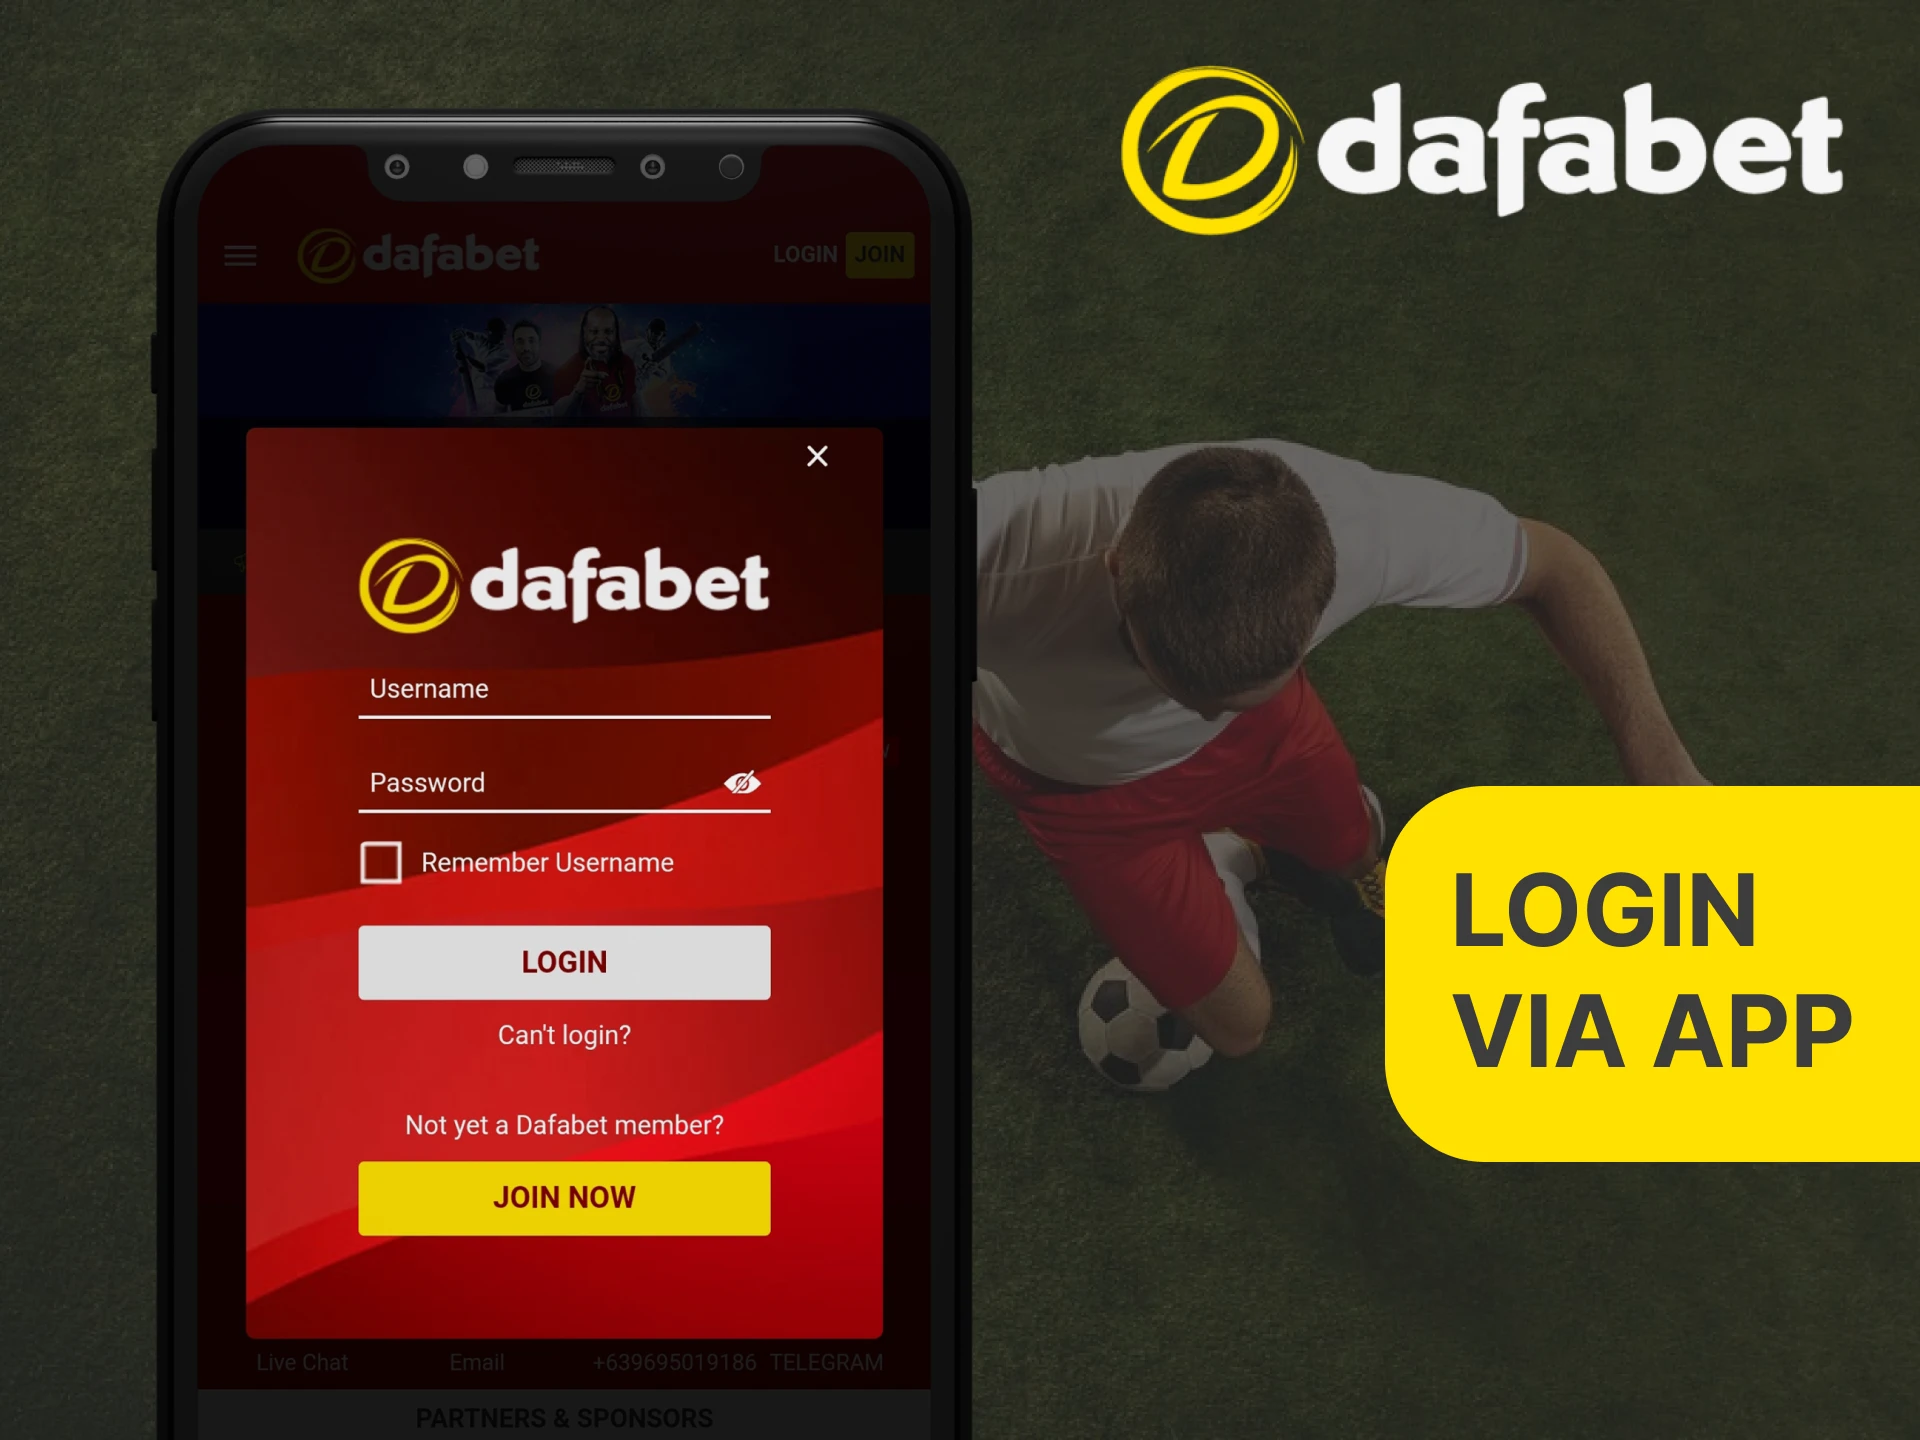 In the Dafabet mobile app, you do not need to create a new account.